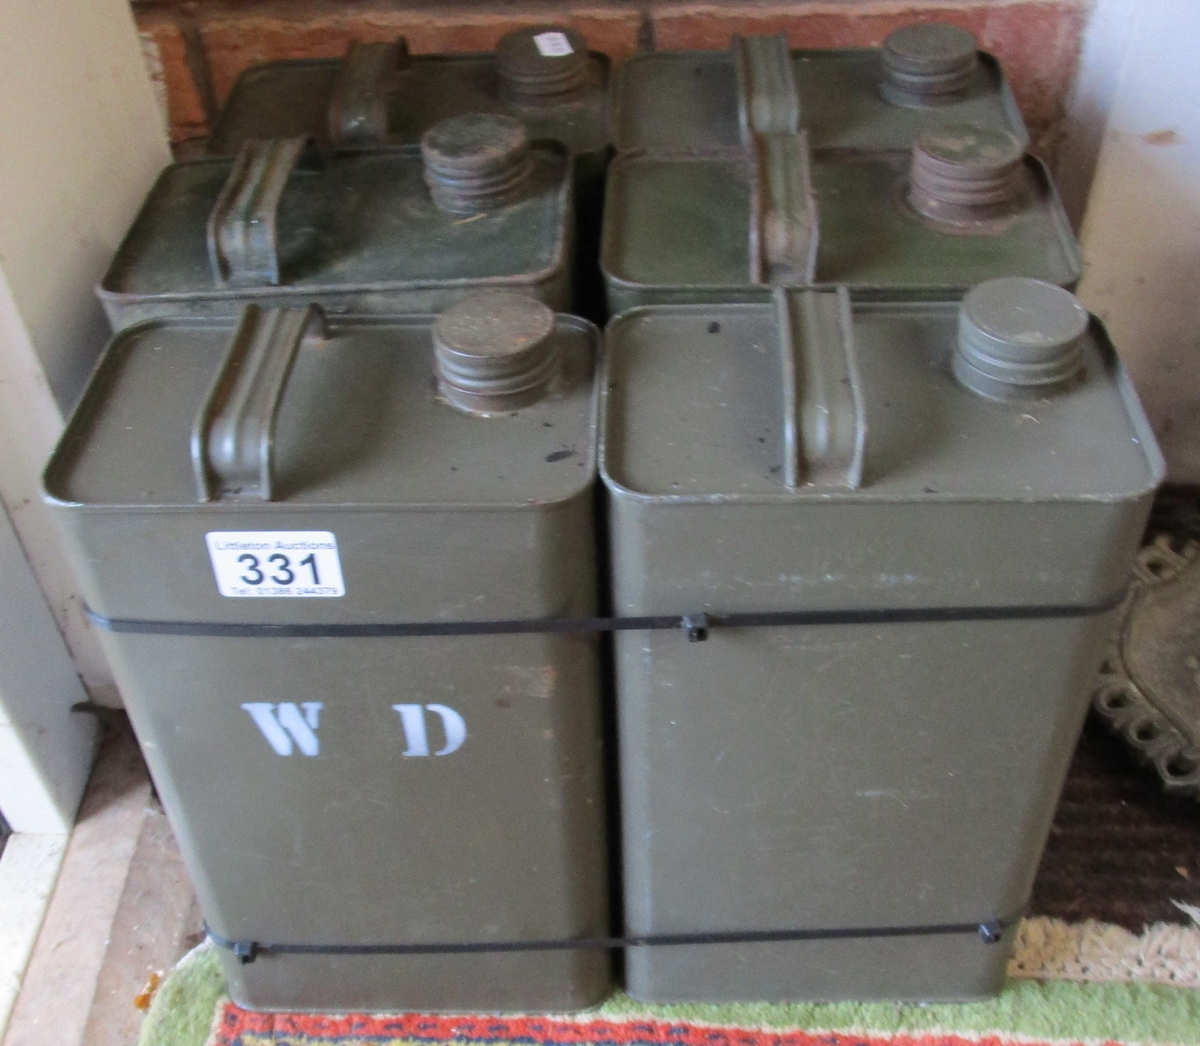 Six military style oil cans